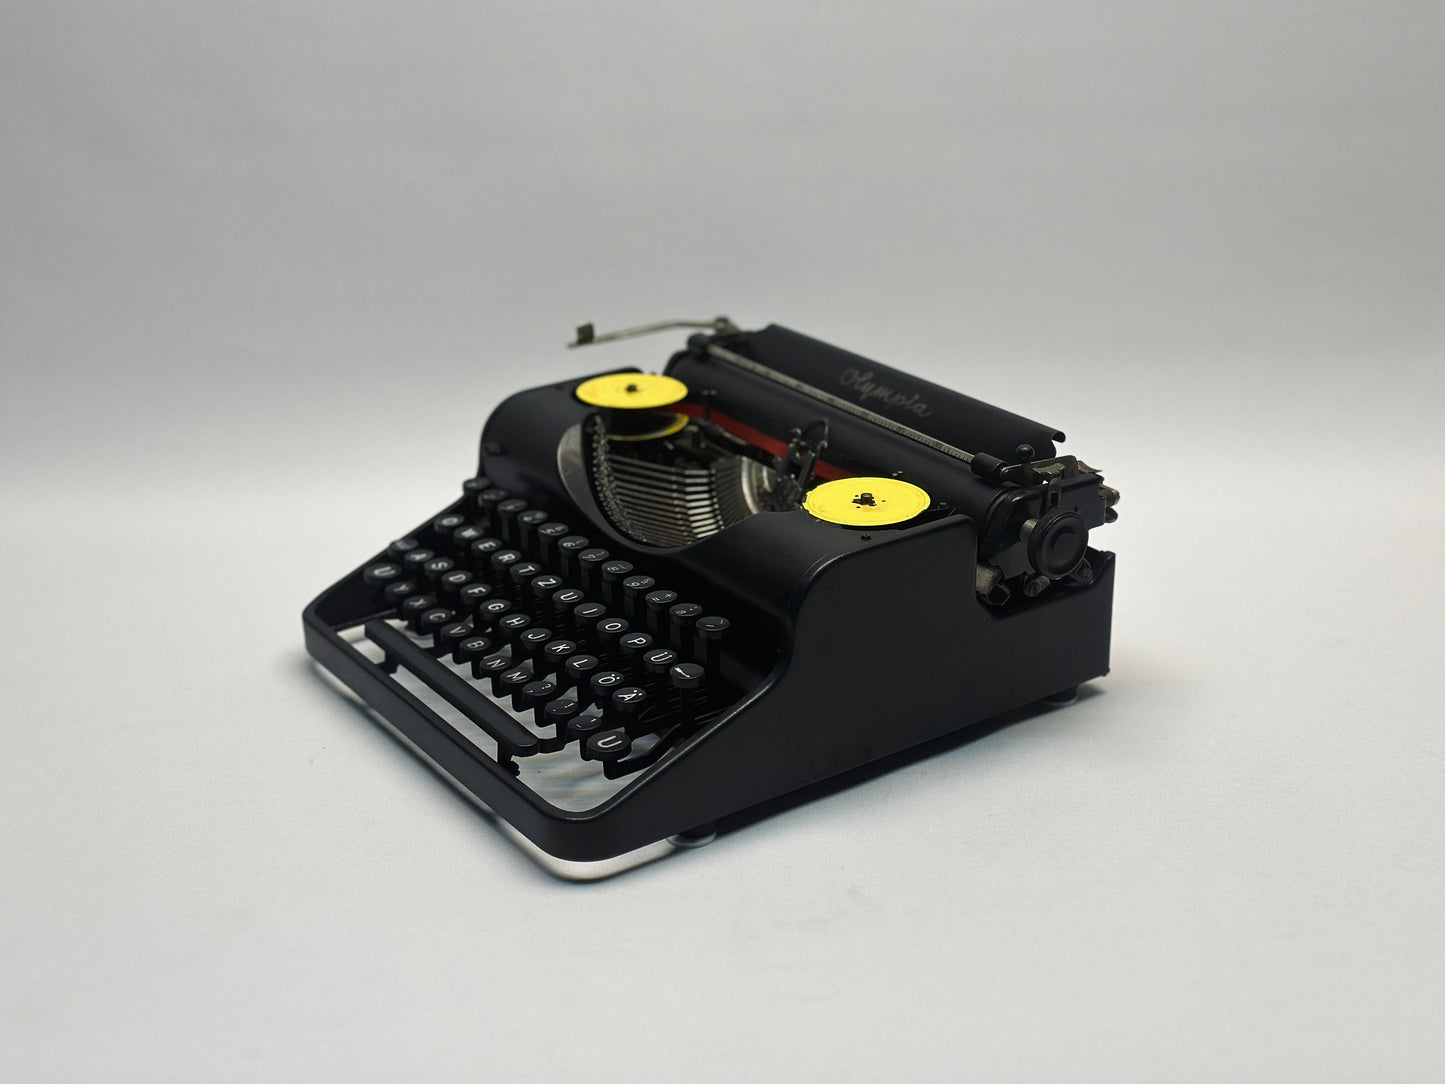 Olympia Black Typewriter - 1940 Model, Impeccable Performance, QWERTZ Keyboard - A Timeless Writing Companion with Black Wood Bag